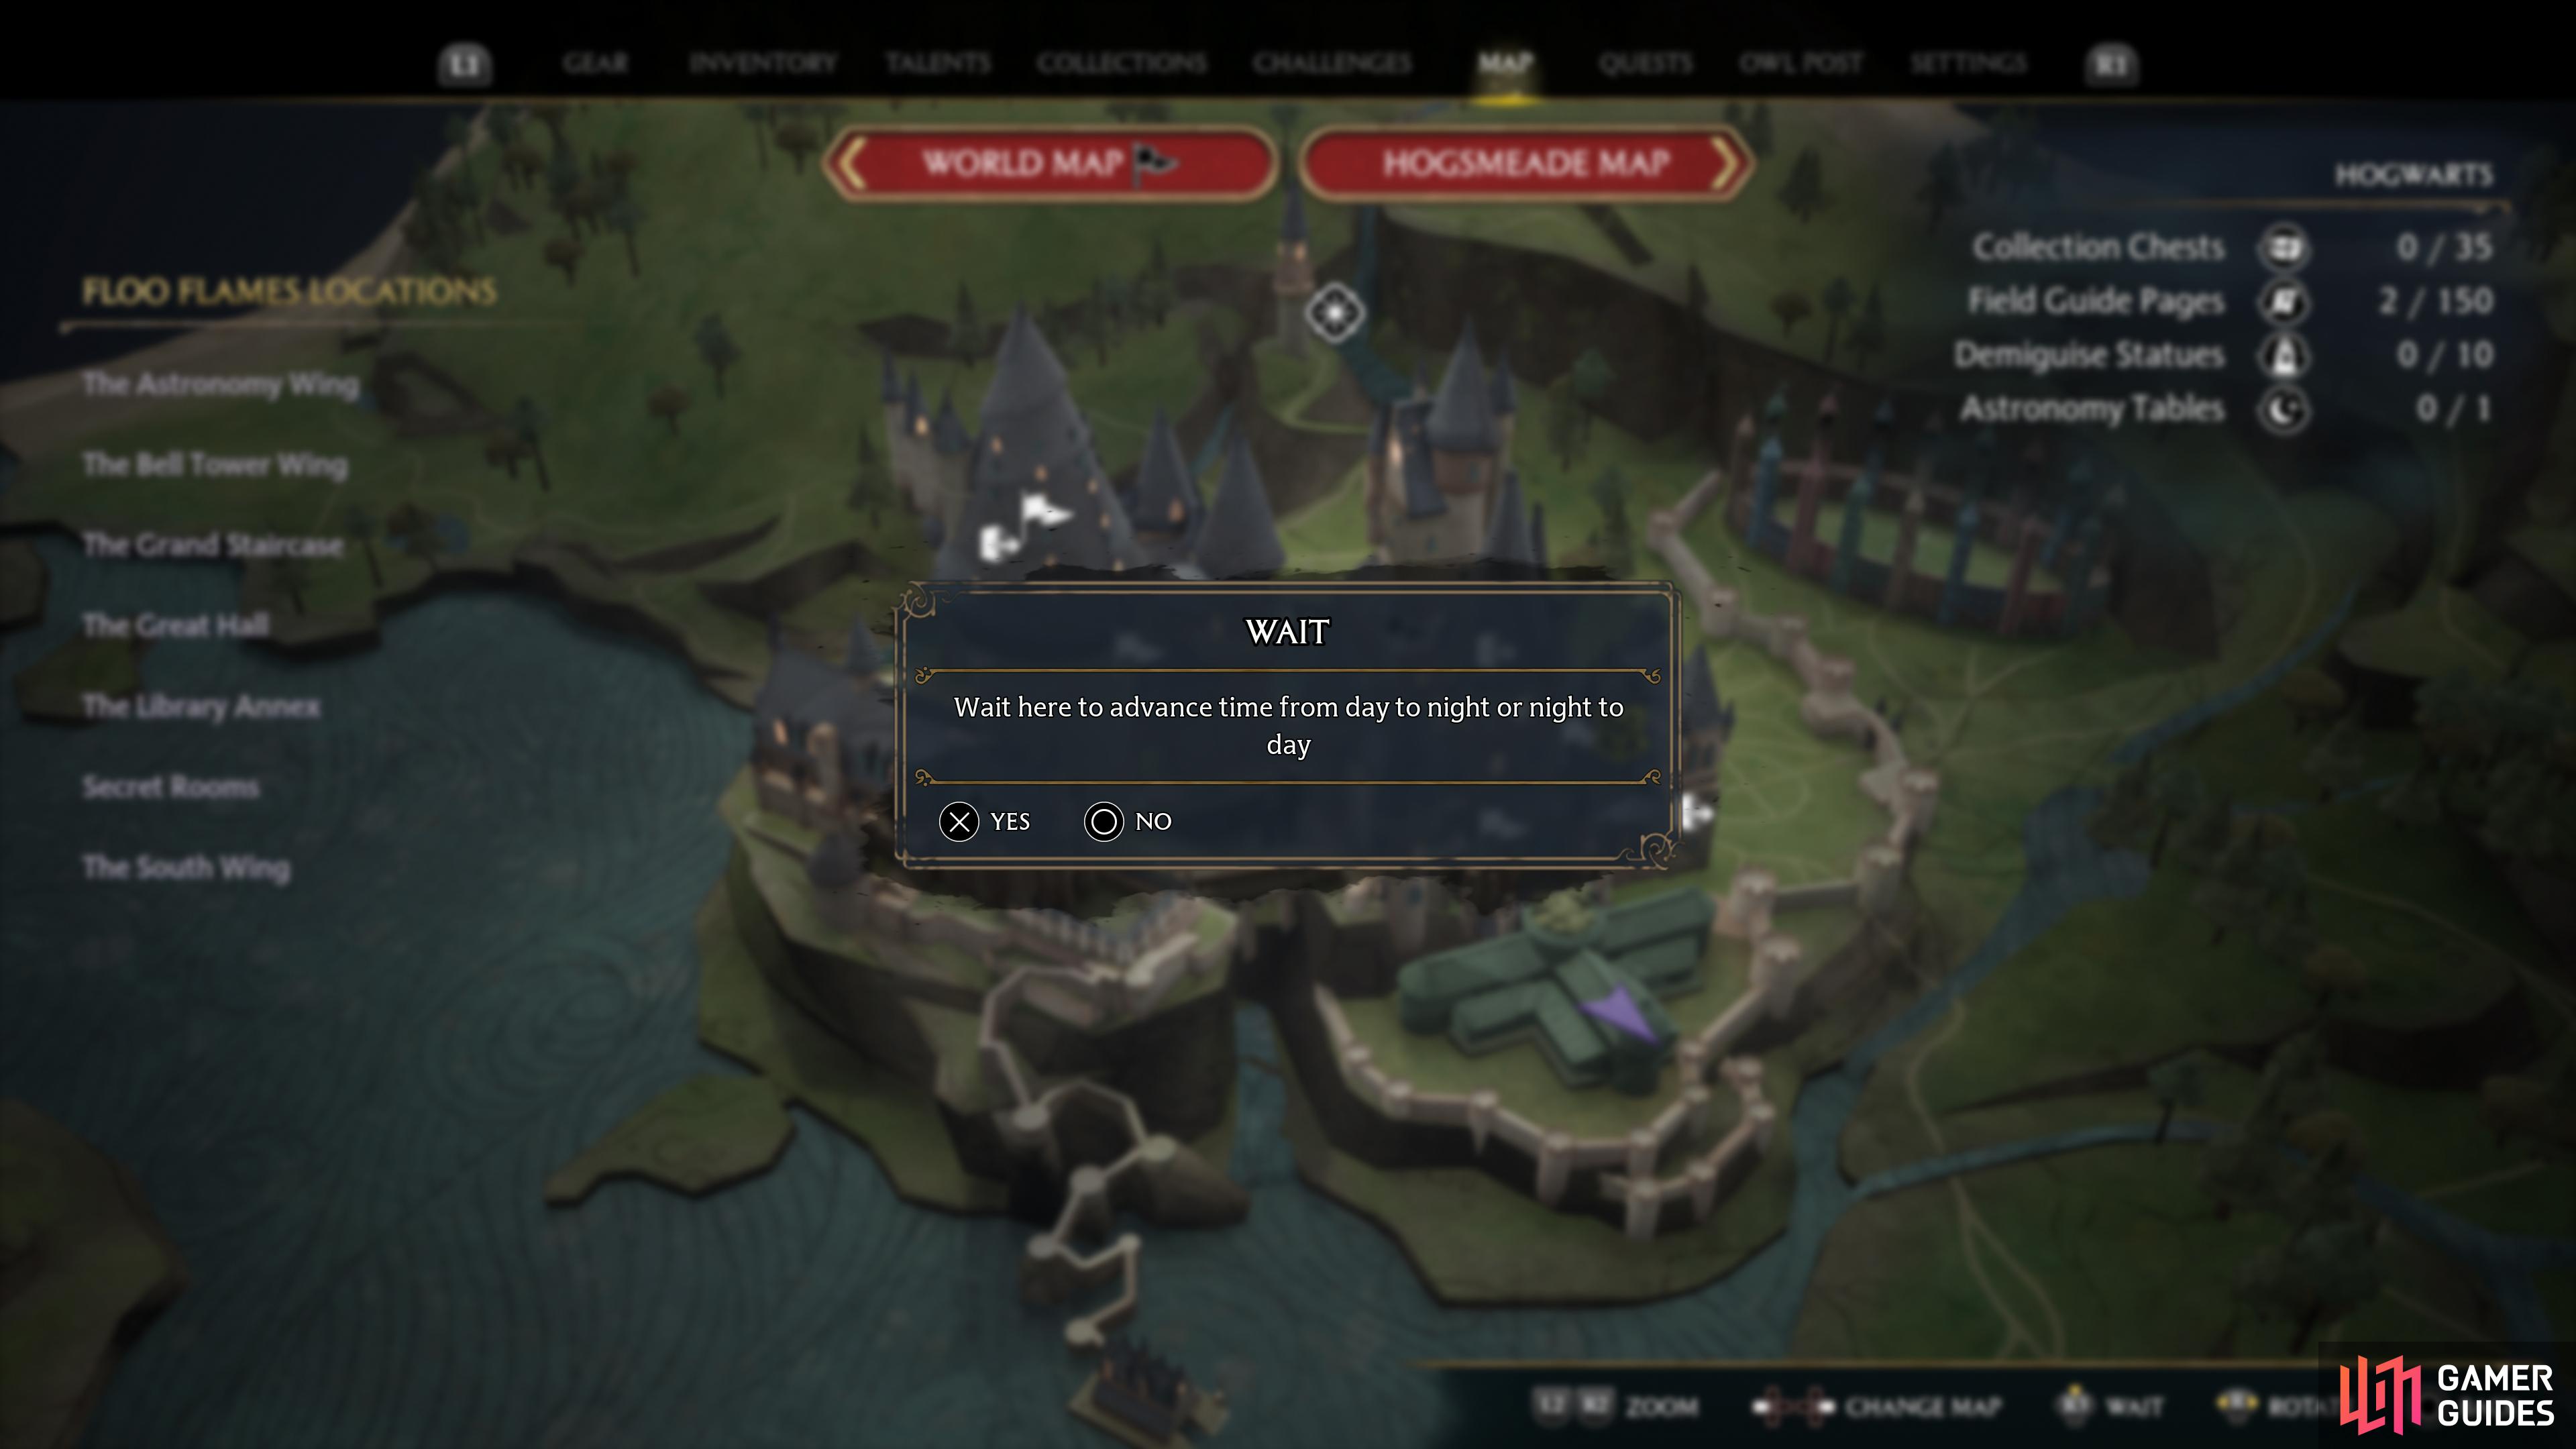 Hogwarts Legacy climbs even higher up Steam charts - The Business Post